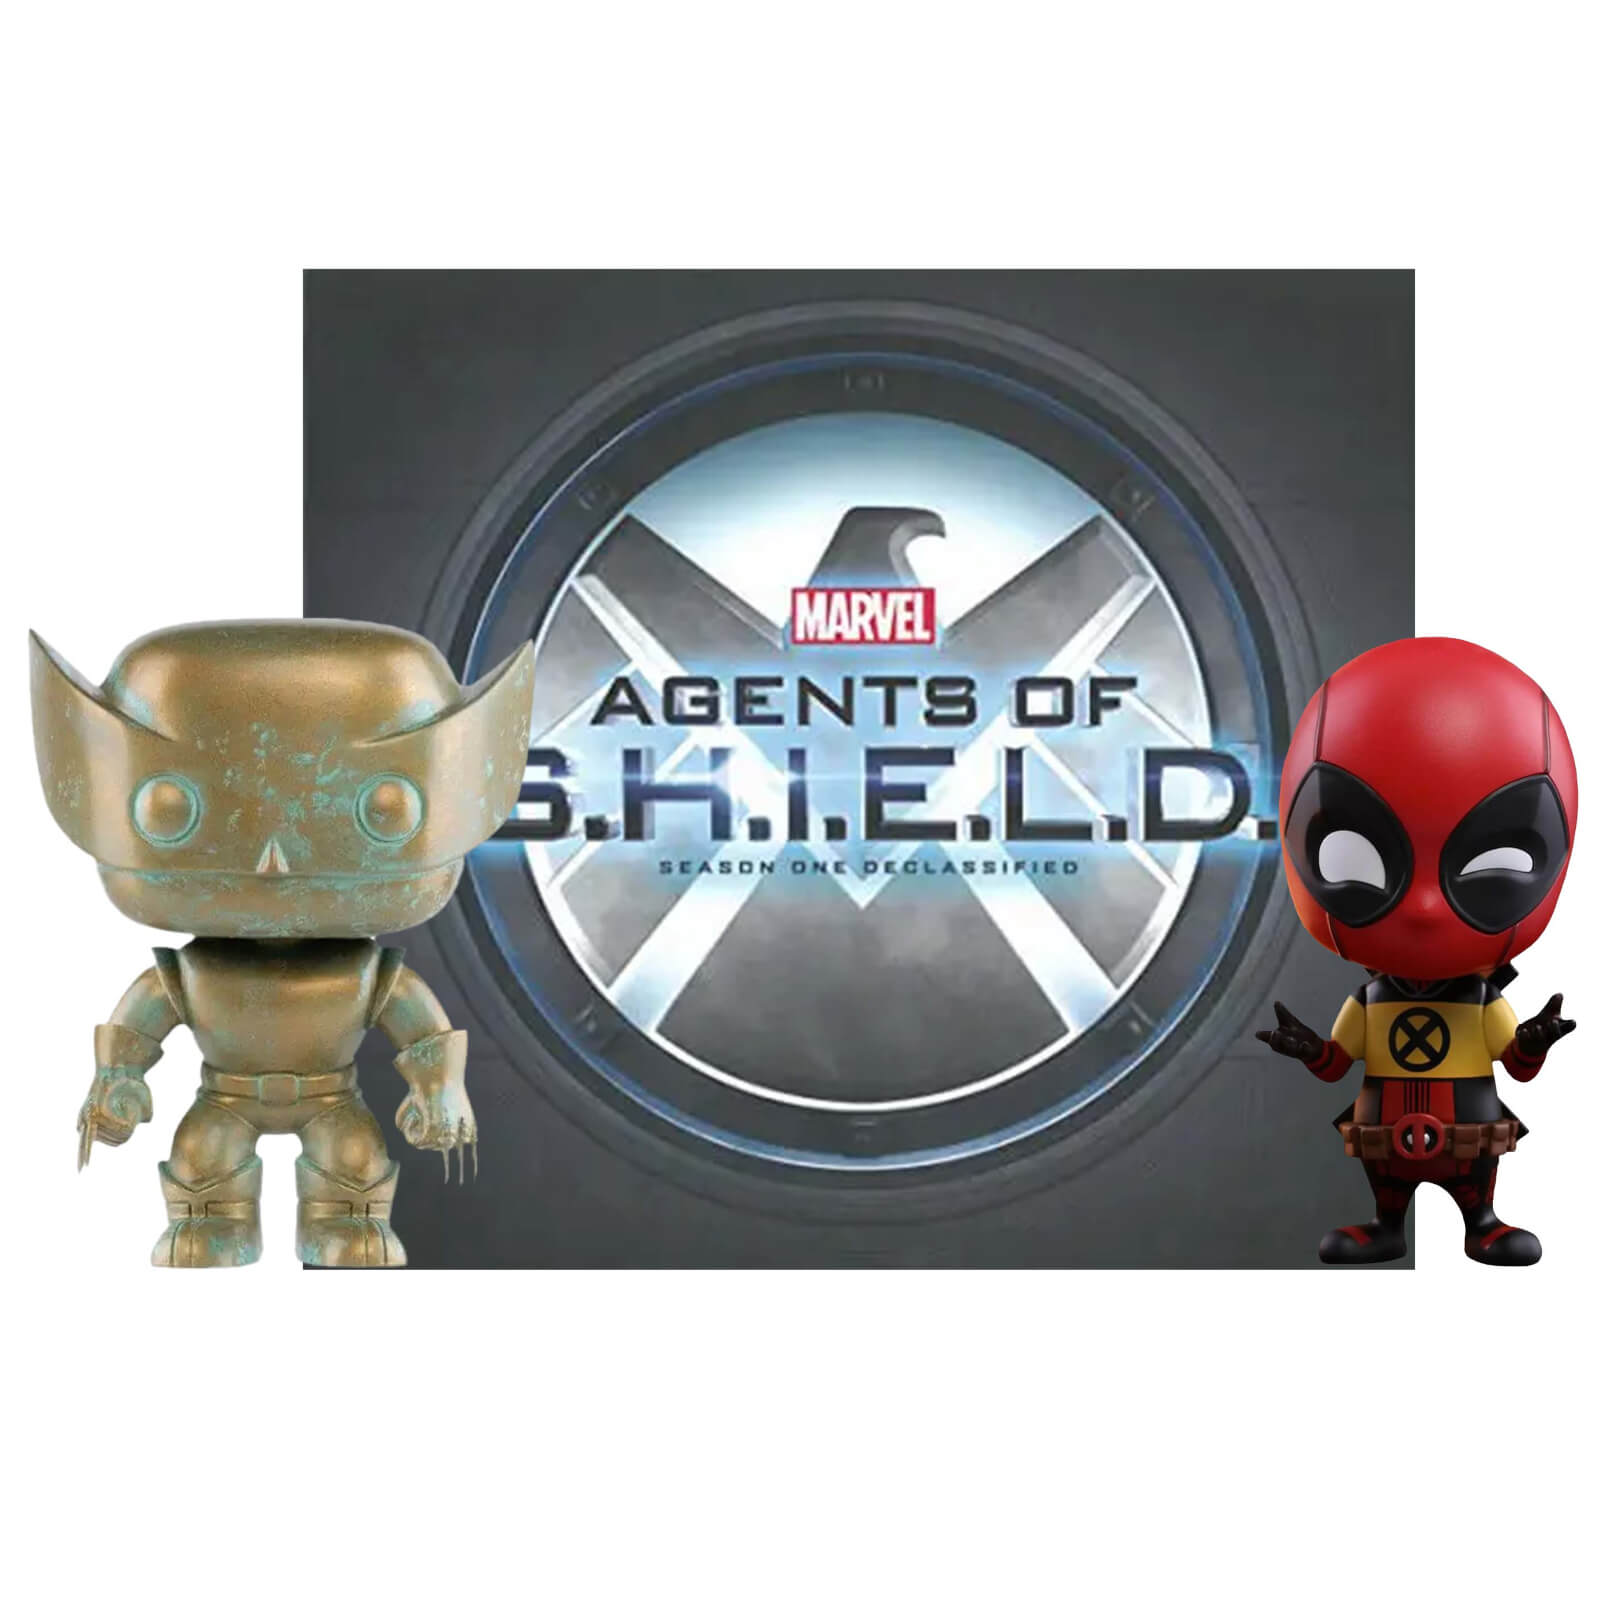 Marvel Book Bundle (Agents of Shield + 2 FREE Gifts)